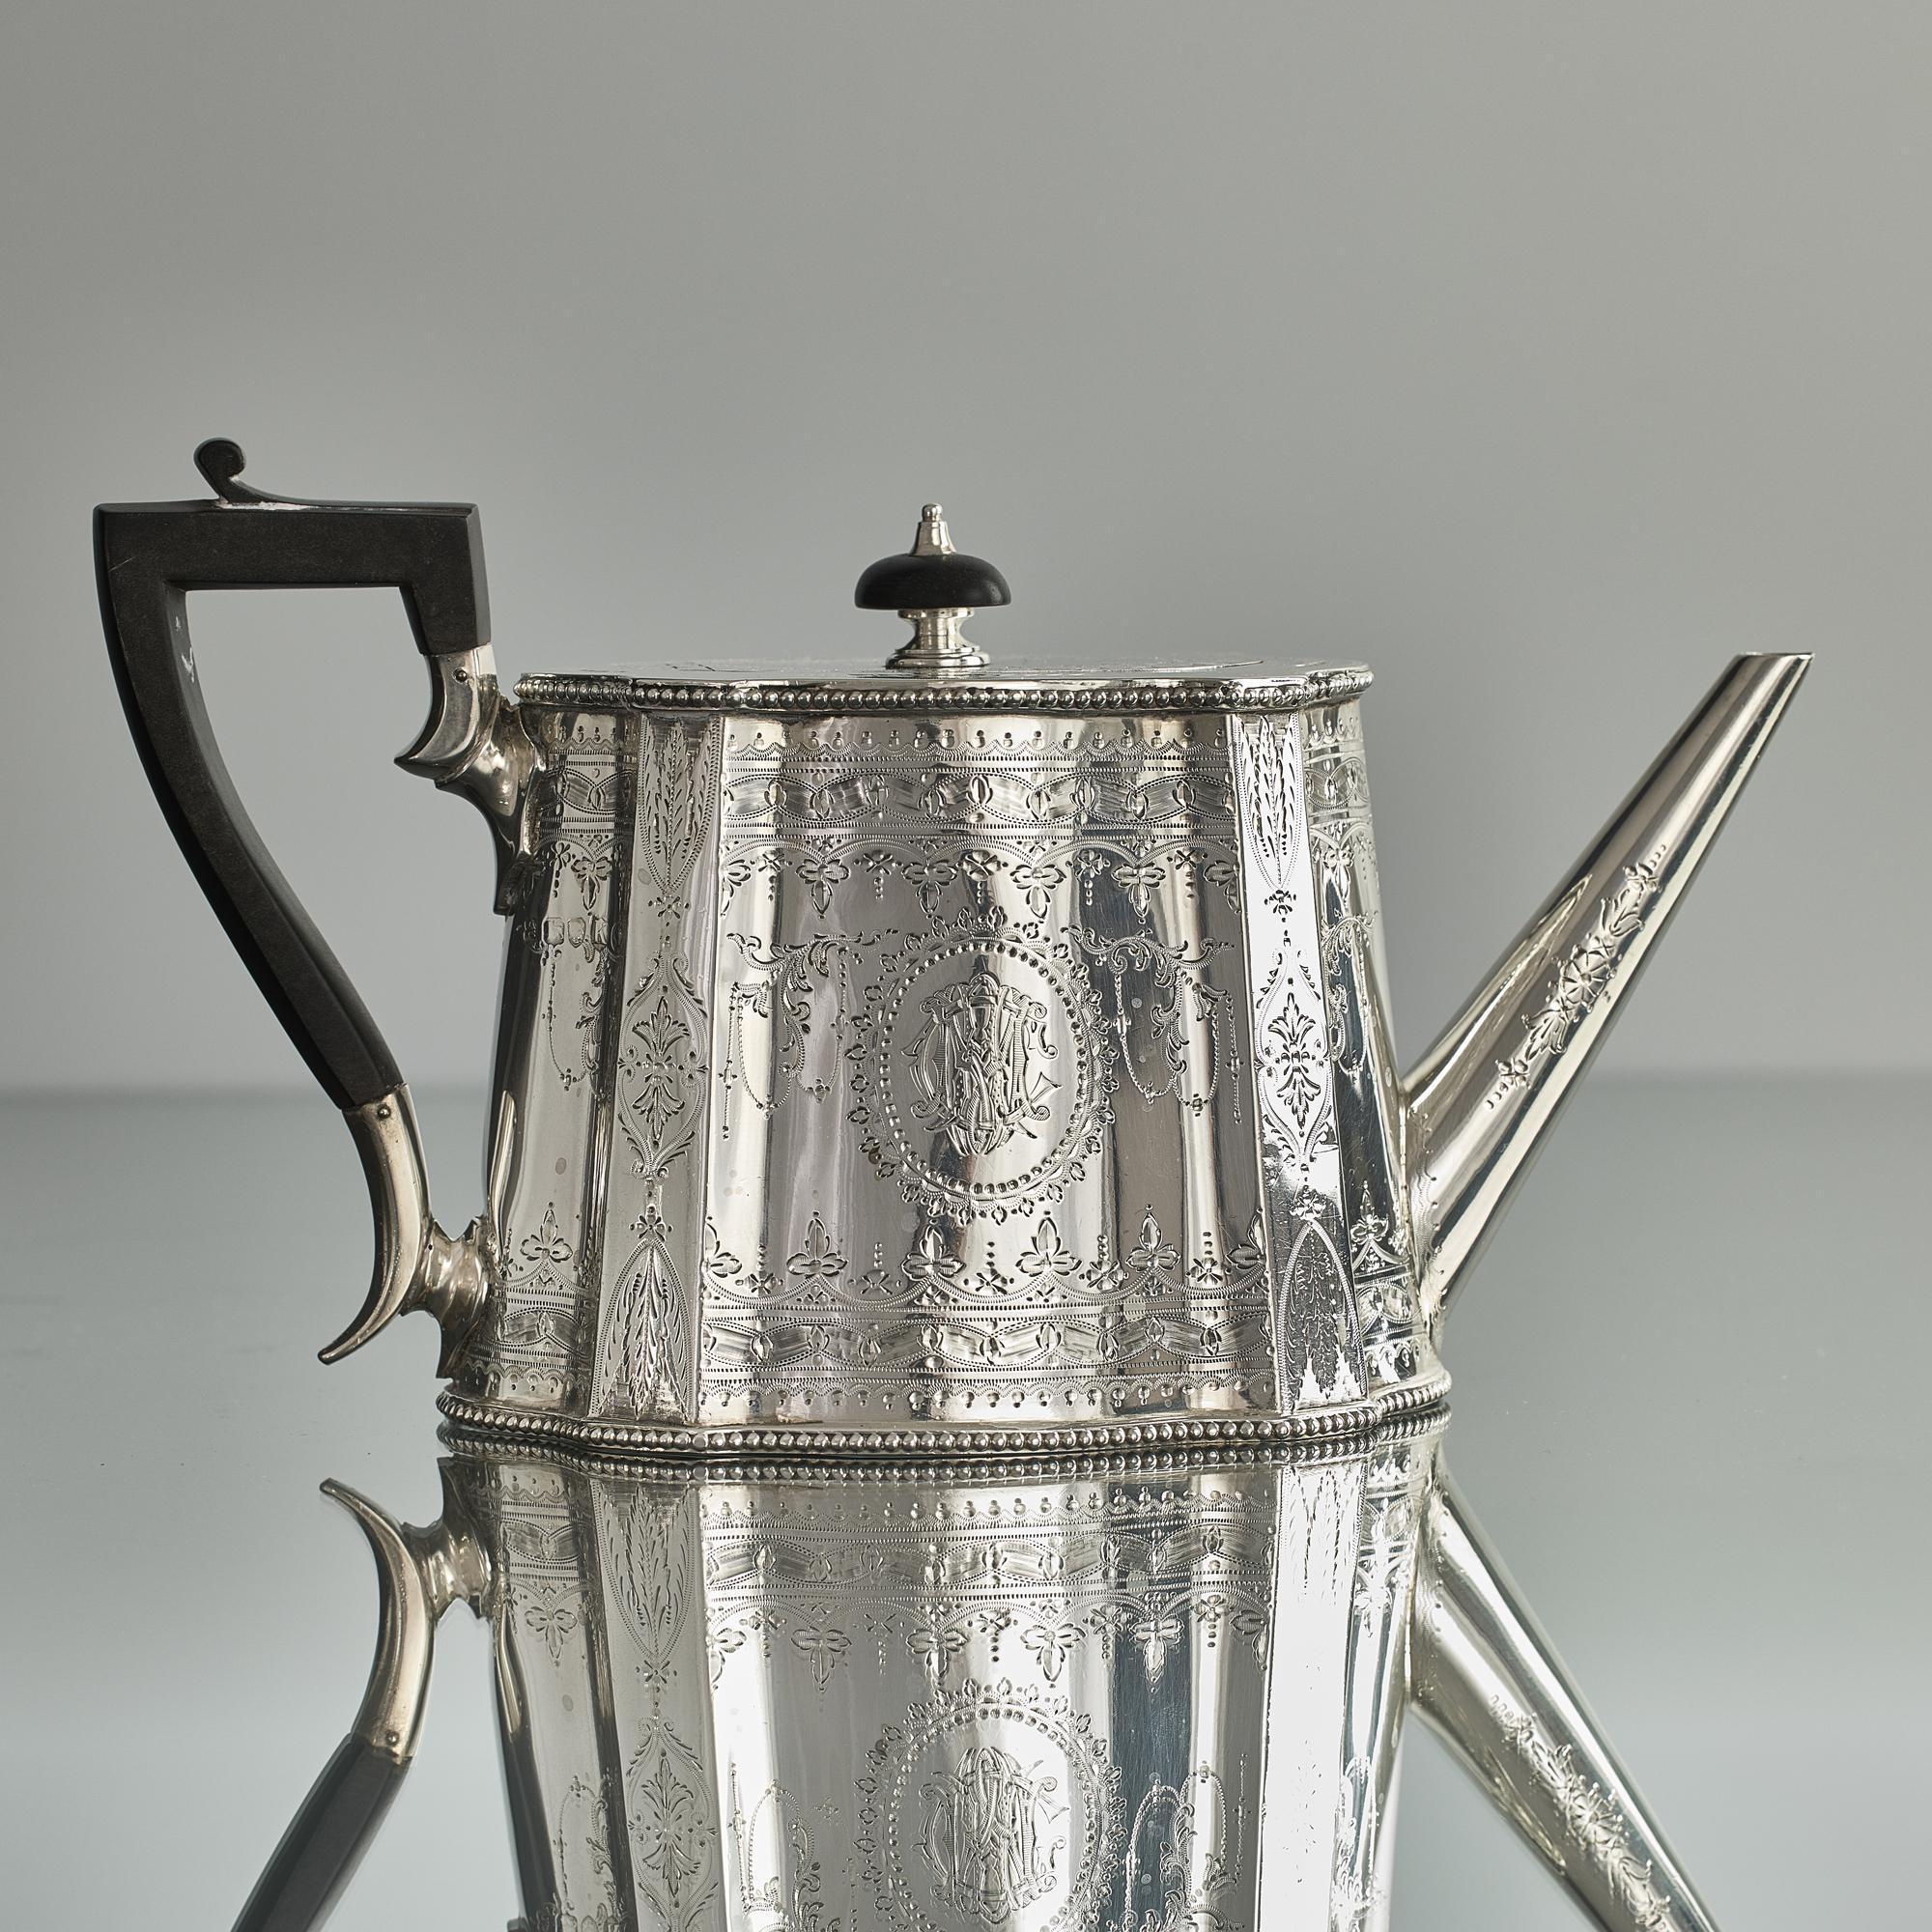 Late Victorian silver teapot of panelled, can-shaped form and decorated with fine hand engraving around the entire body and cover. The cover is fitted with a flush-mounted jeweller's hinge - a sign of quality - and is surmounted by a detachable